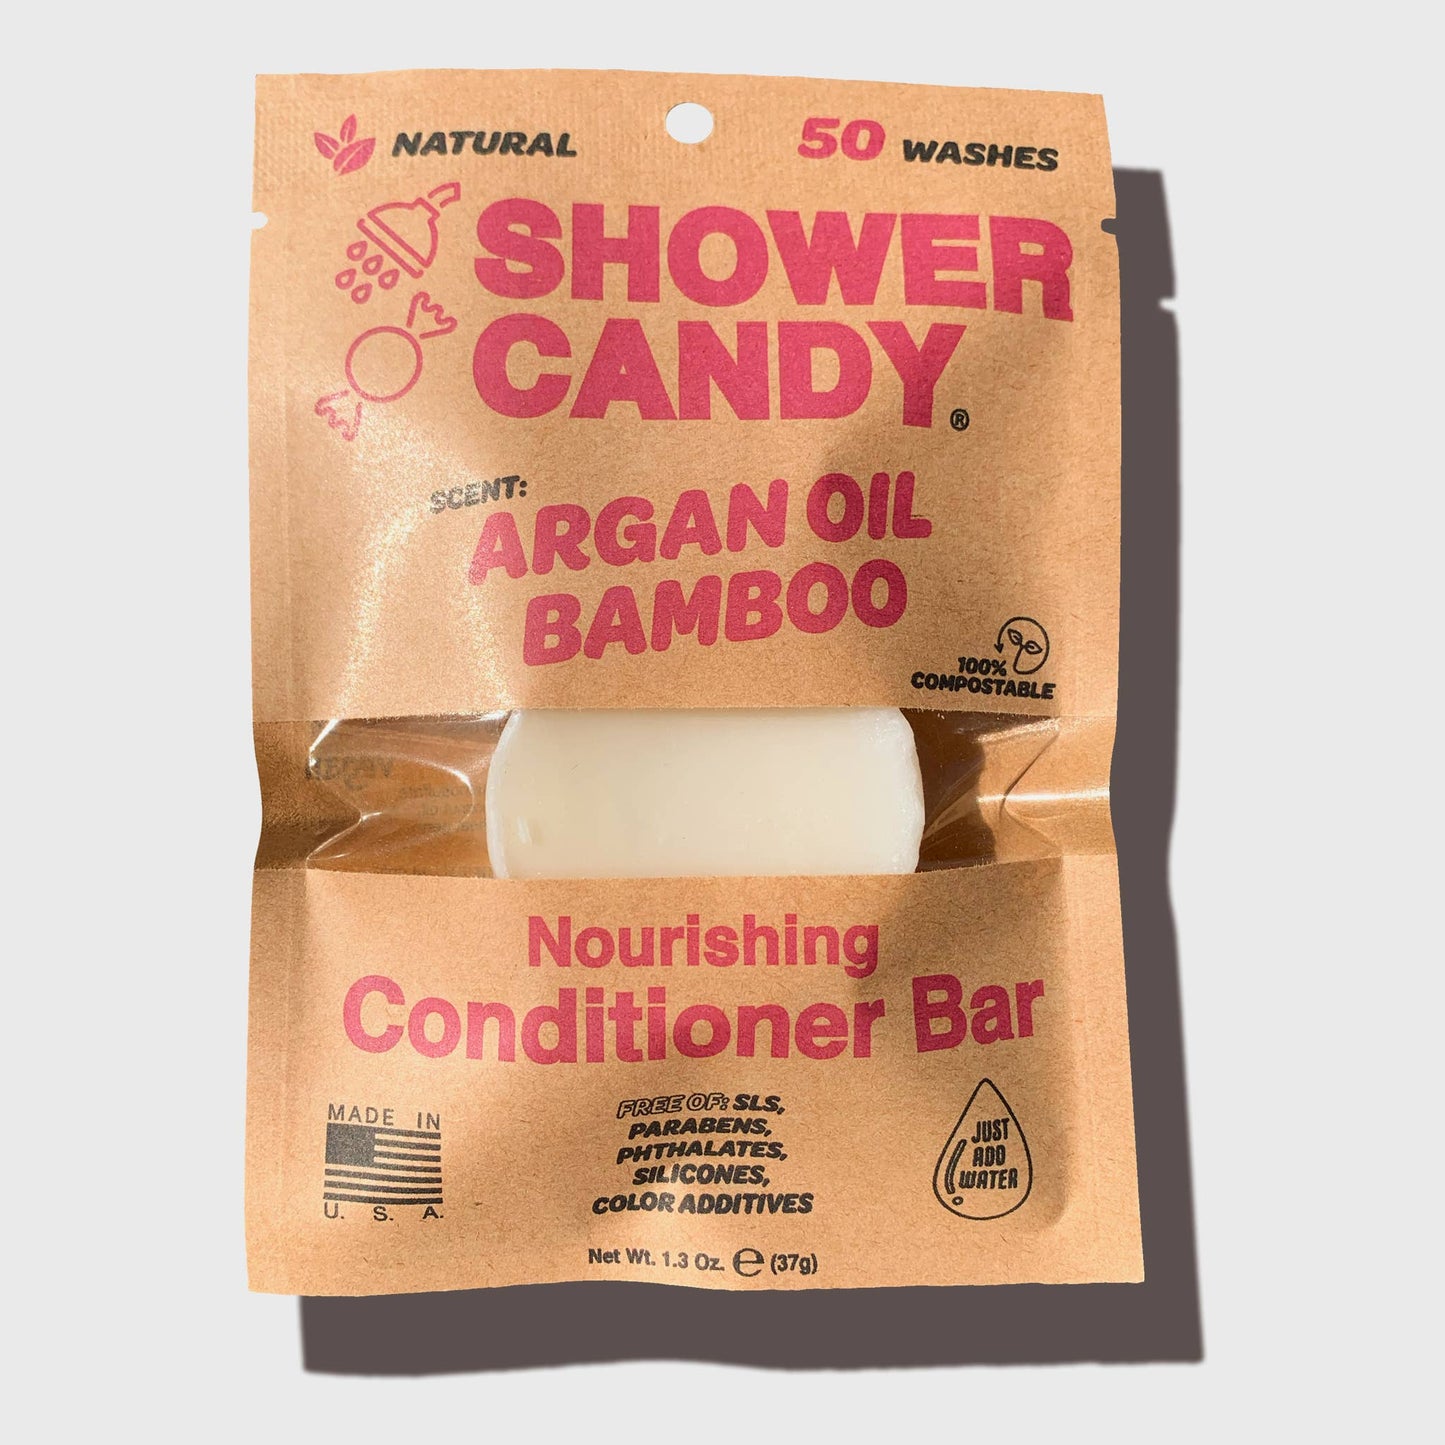 Shower Candy - Argan Oil Bamboo Conditioner Bar